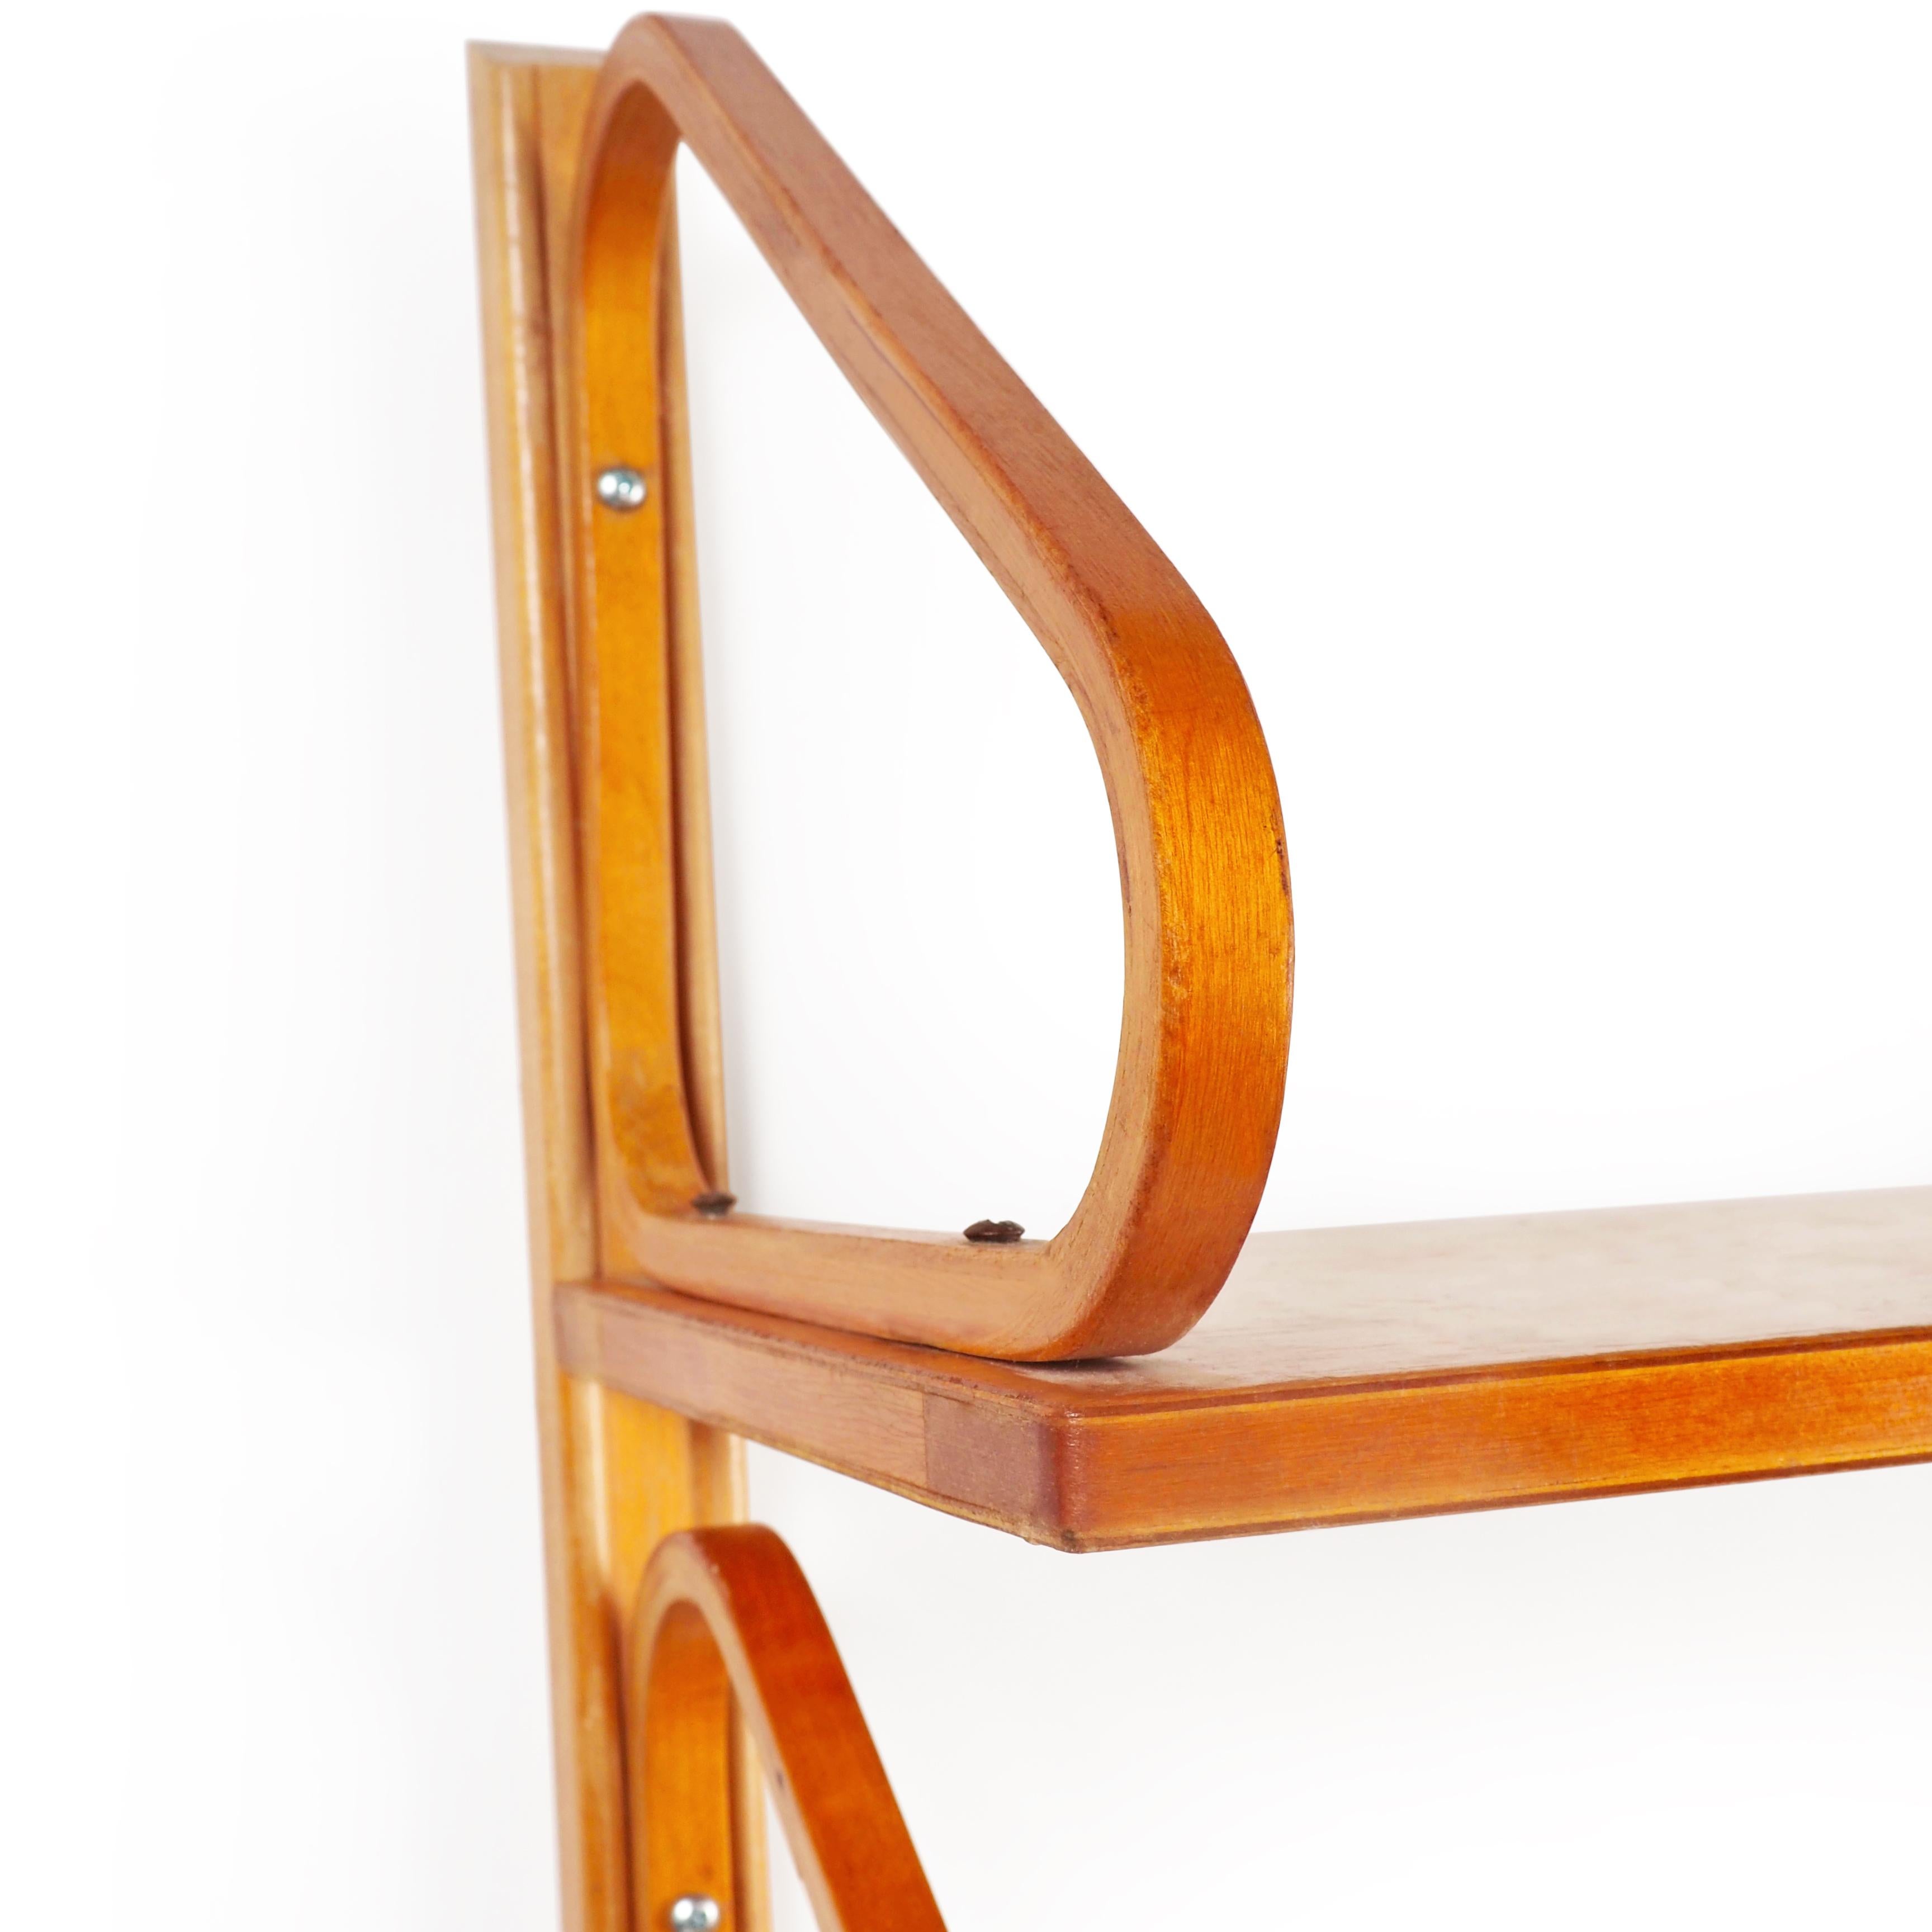 After launching his career in Finland during the early modernist period in the 1930's, the Finnish architect Alvar Aalto in the forties started a production of his furniture in Sweden. The factory was called Aalto Möbler Hedemora, namned after the